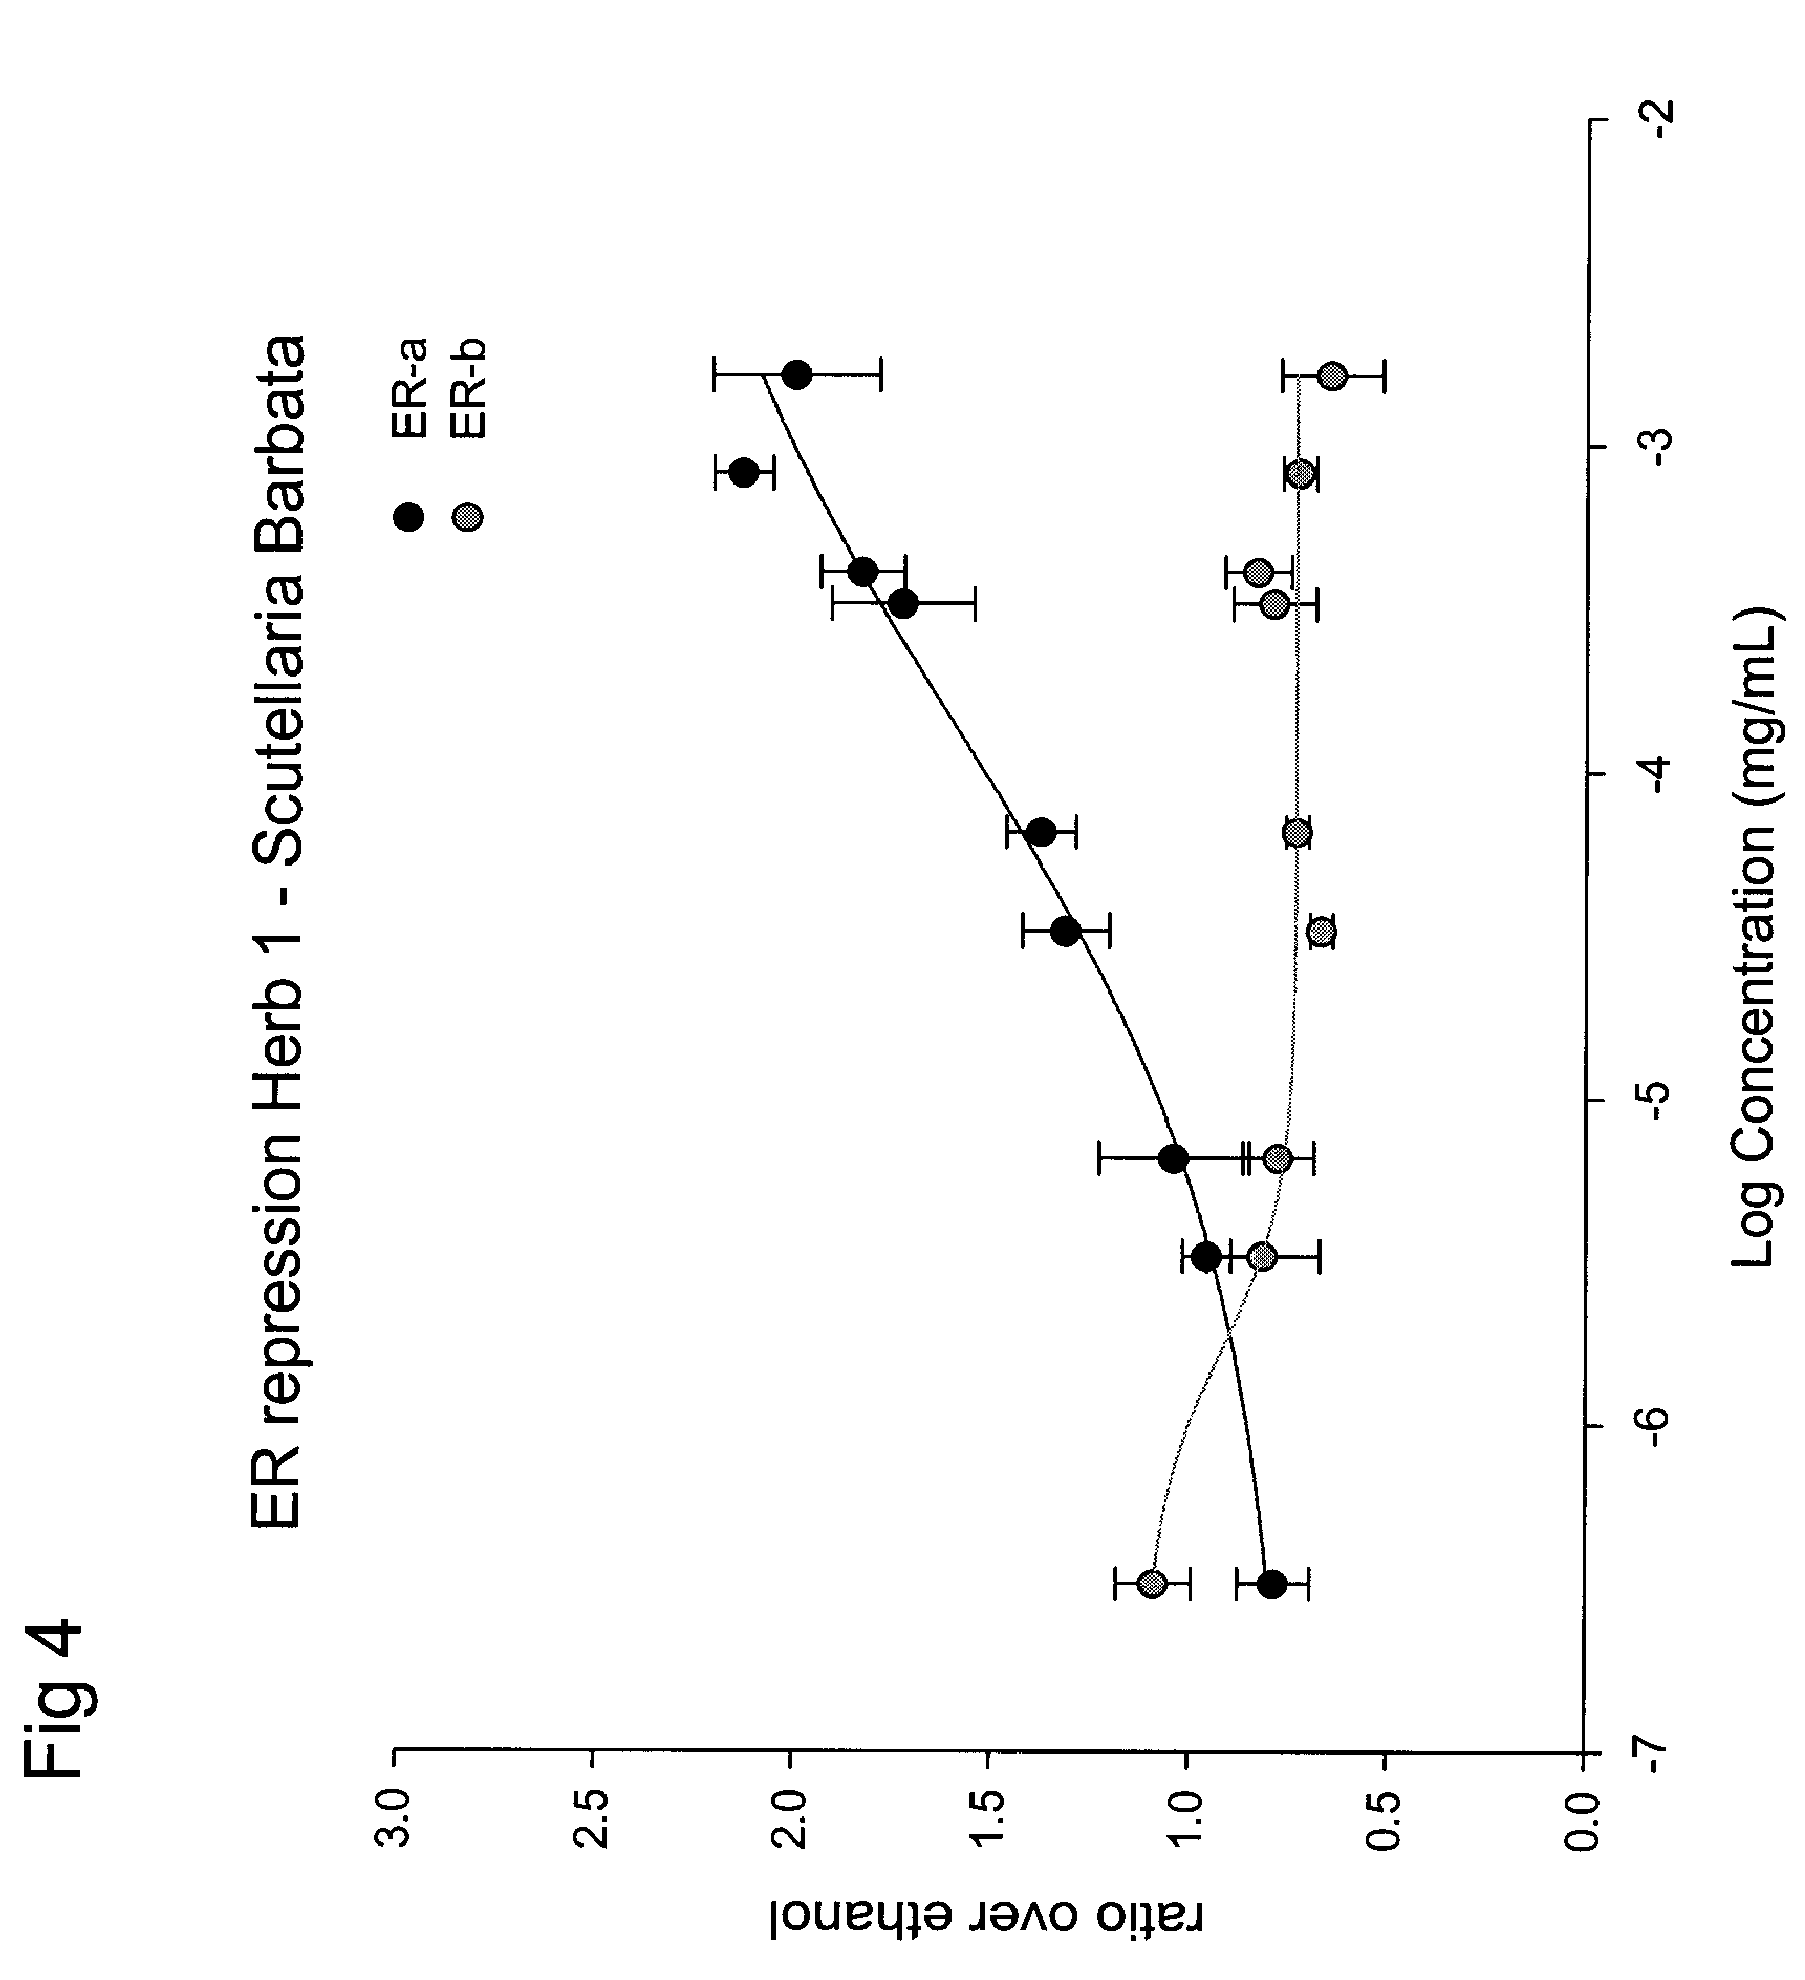 Estrogenic extracts of <i>Scuttelaria barbata </i>D. don of the labiatae family and uses thereof